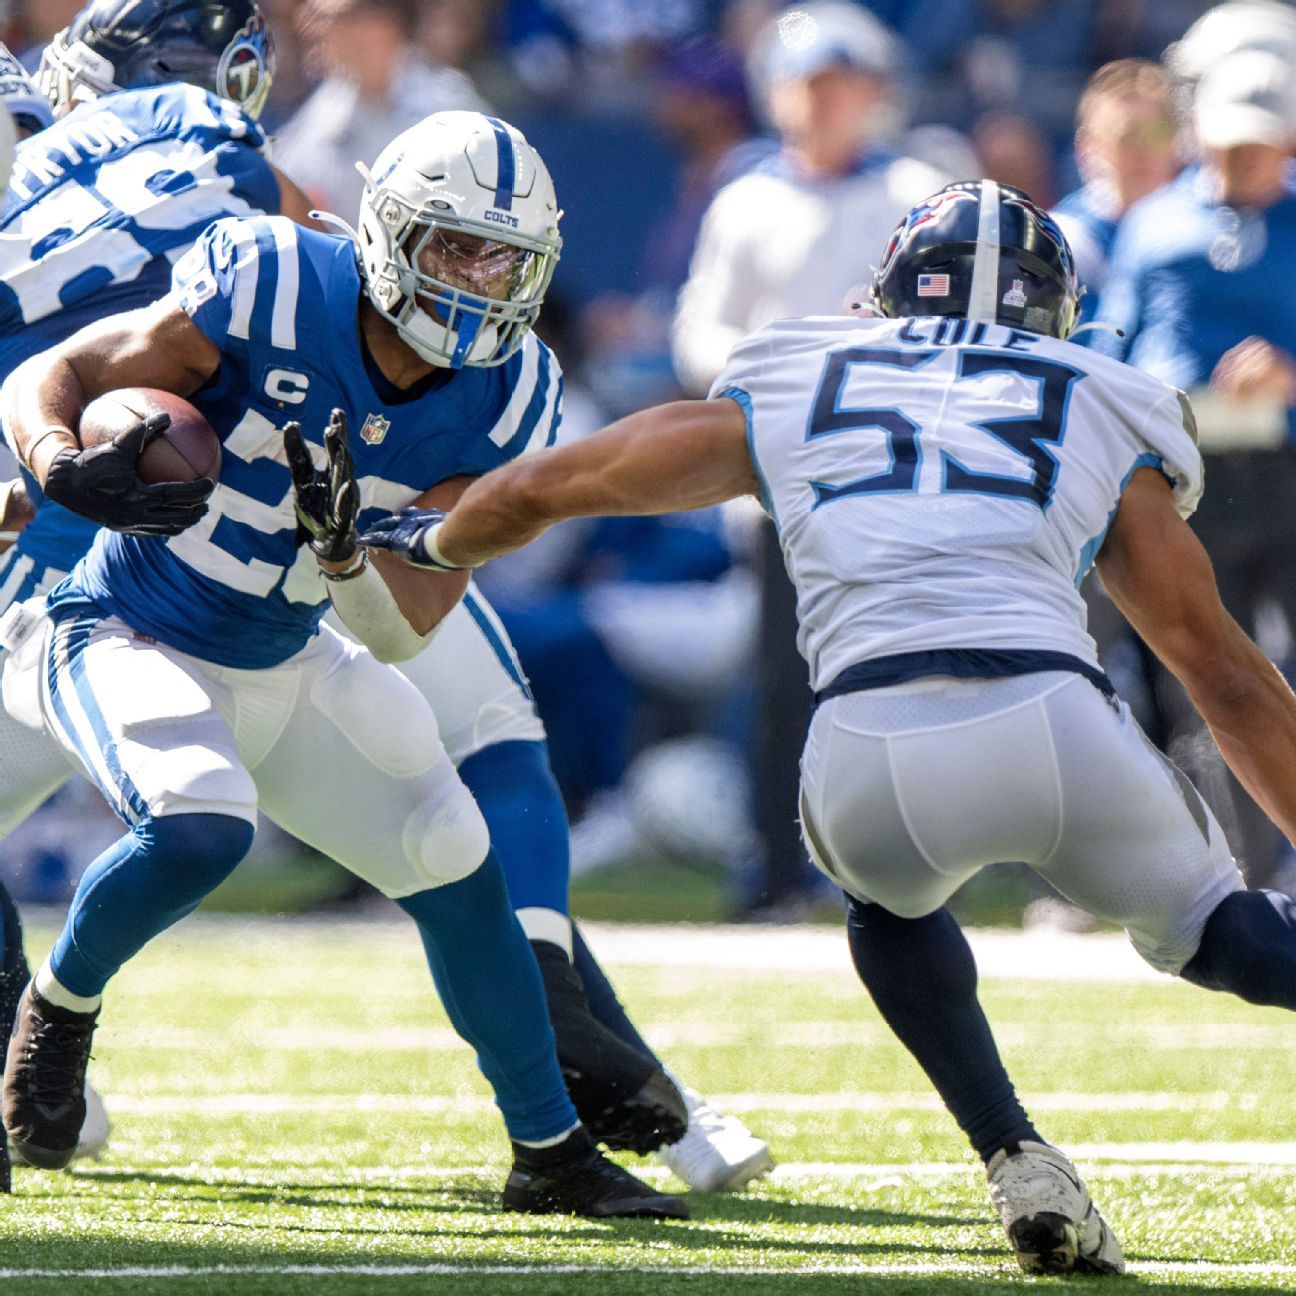 Colts RB Taylor hopes to play despite ankle injury